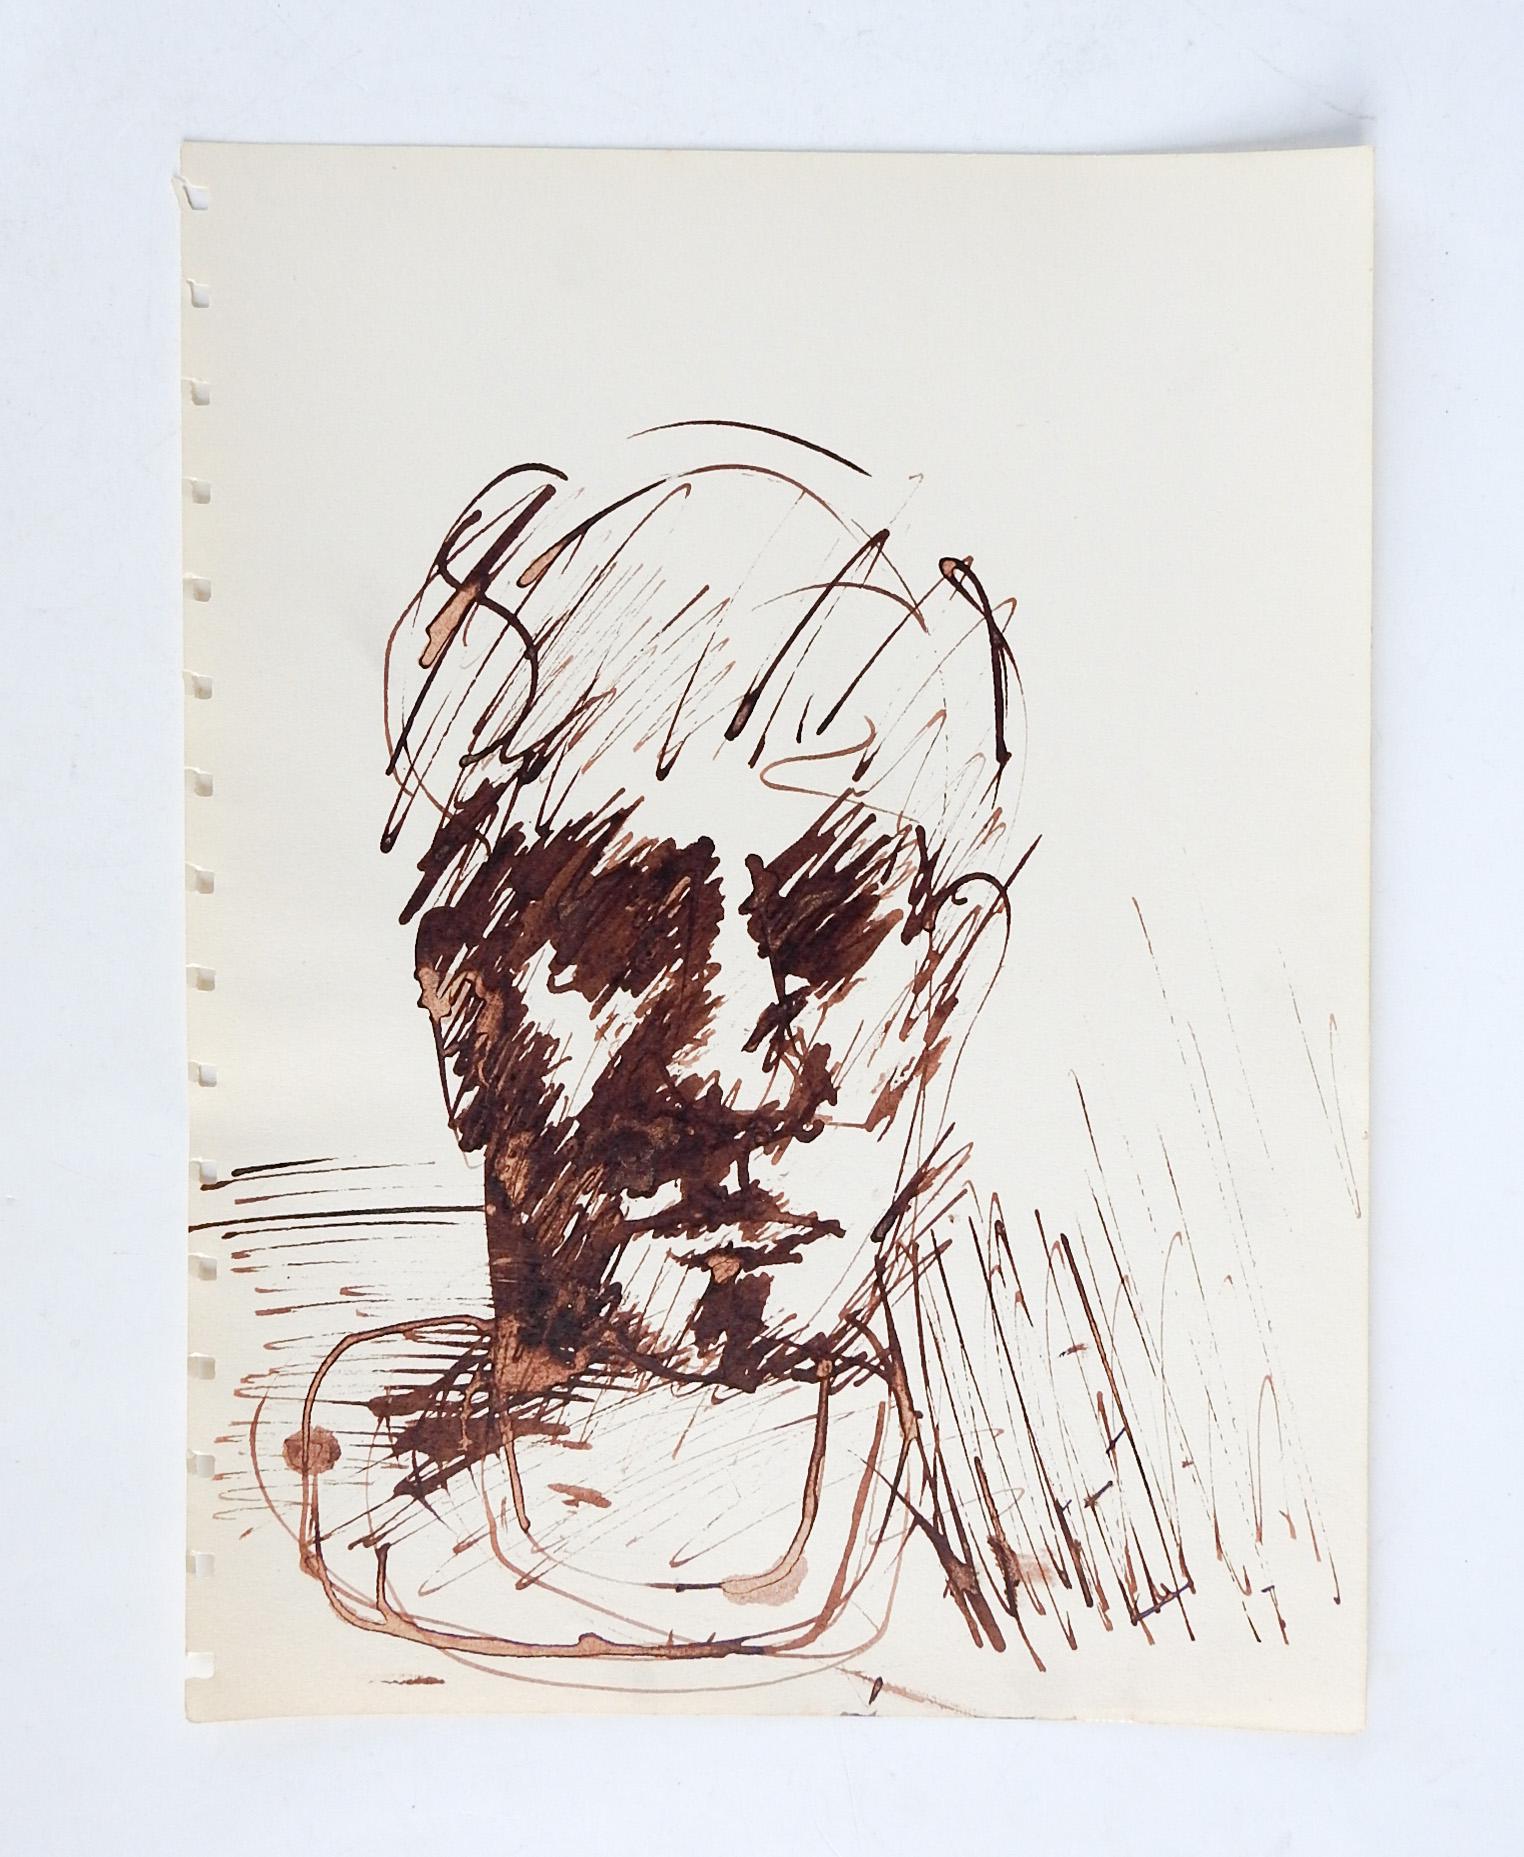 Vintage mid 20th century sepia ink on paper impressionist portrait drawing of man. Unsigned. Unframed, age toning, sketch book edge perforations.